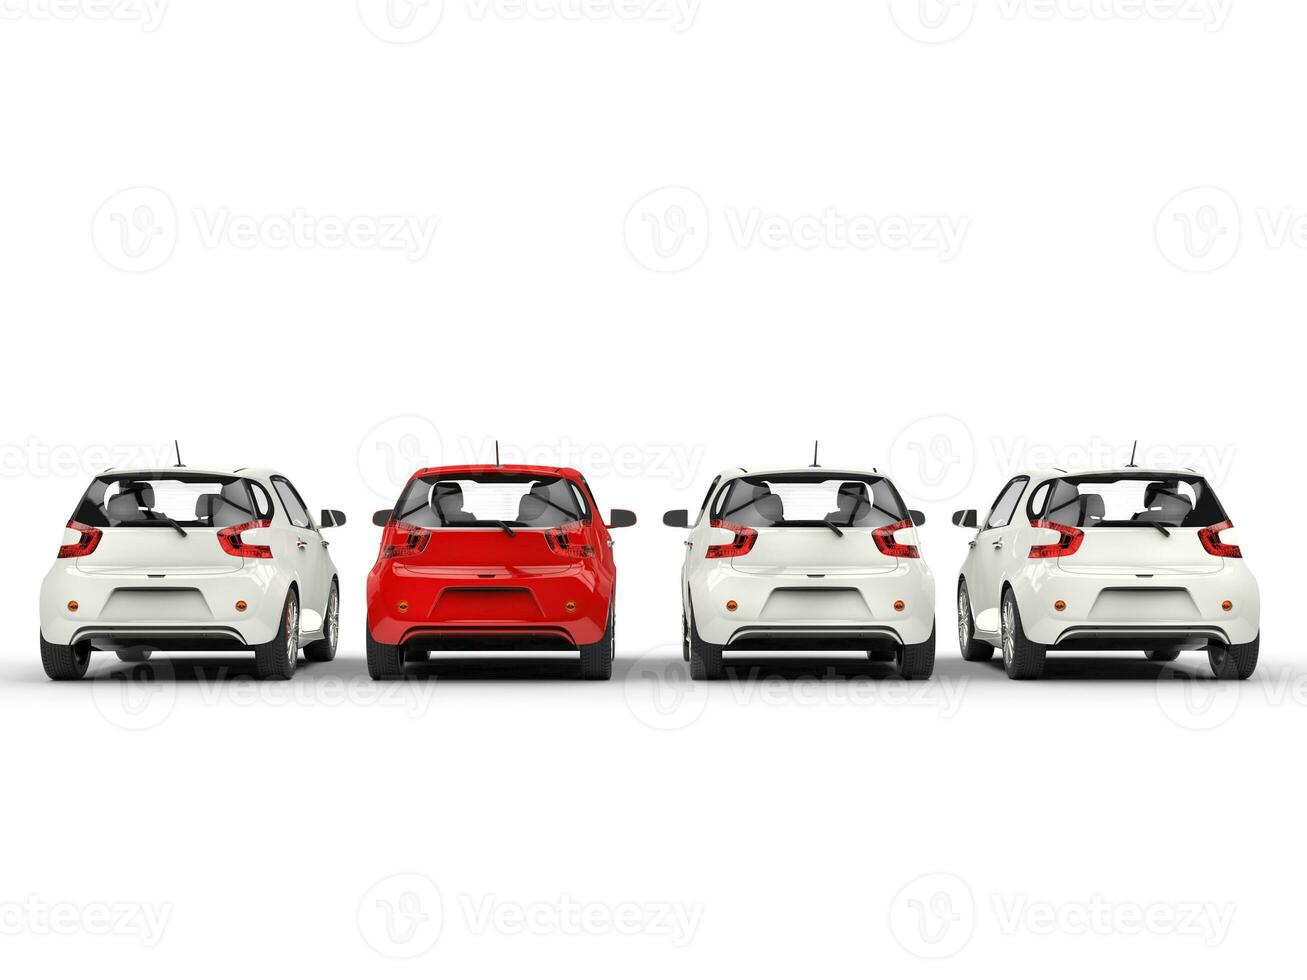 Row of compact cars - red stands out - rear view photo